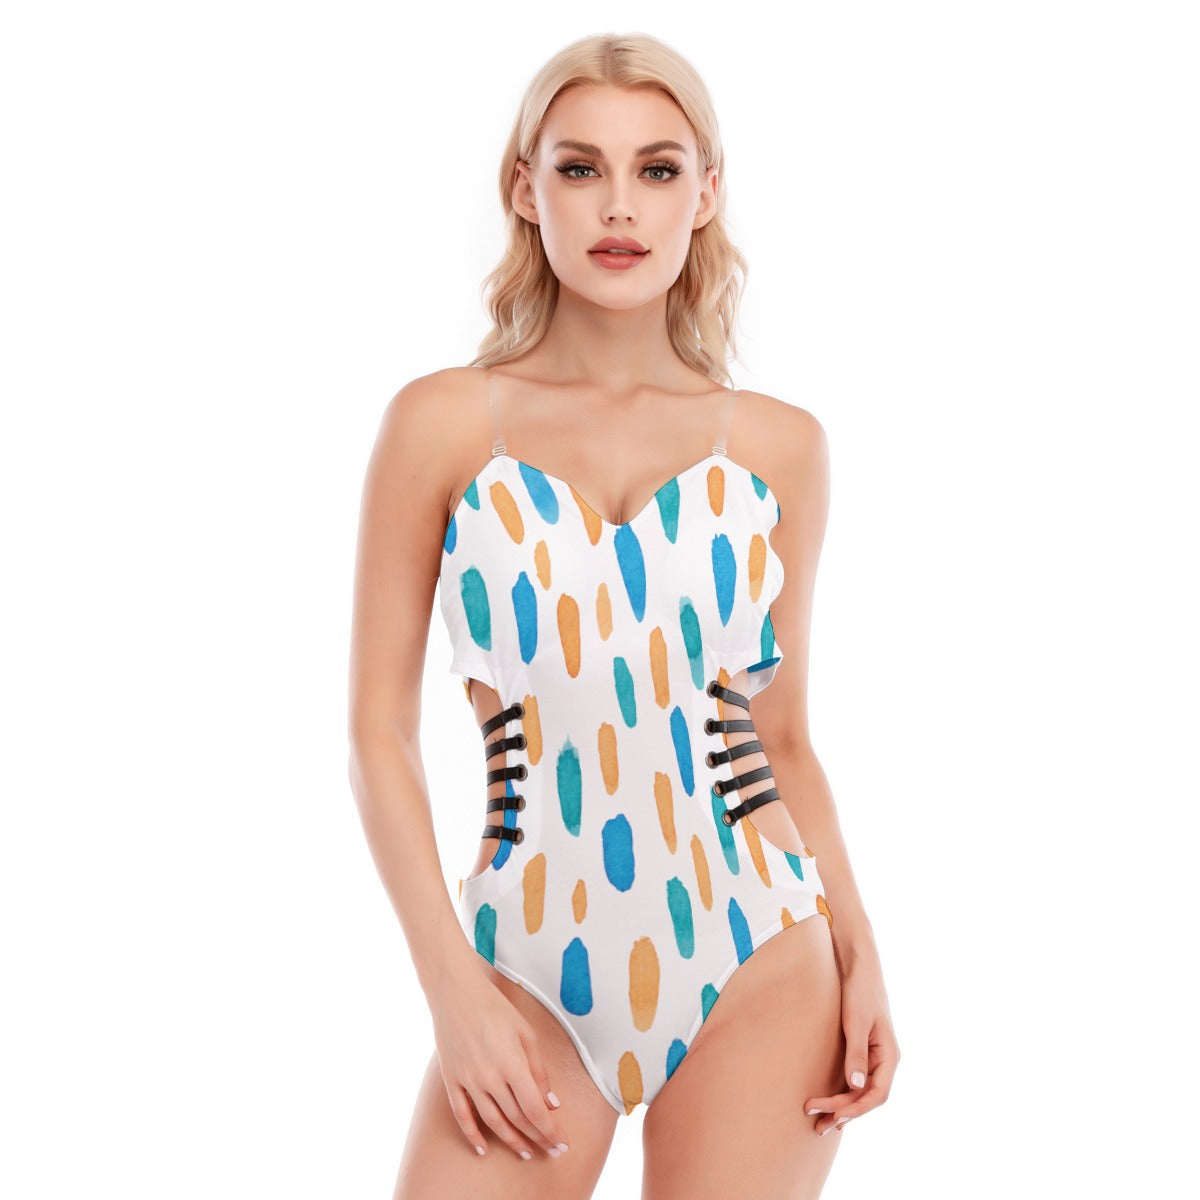 All-Over Print Women's Tube Top Bodysuit With Side Black Straps